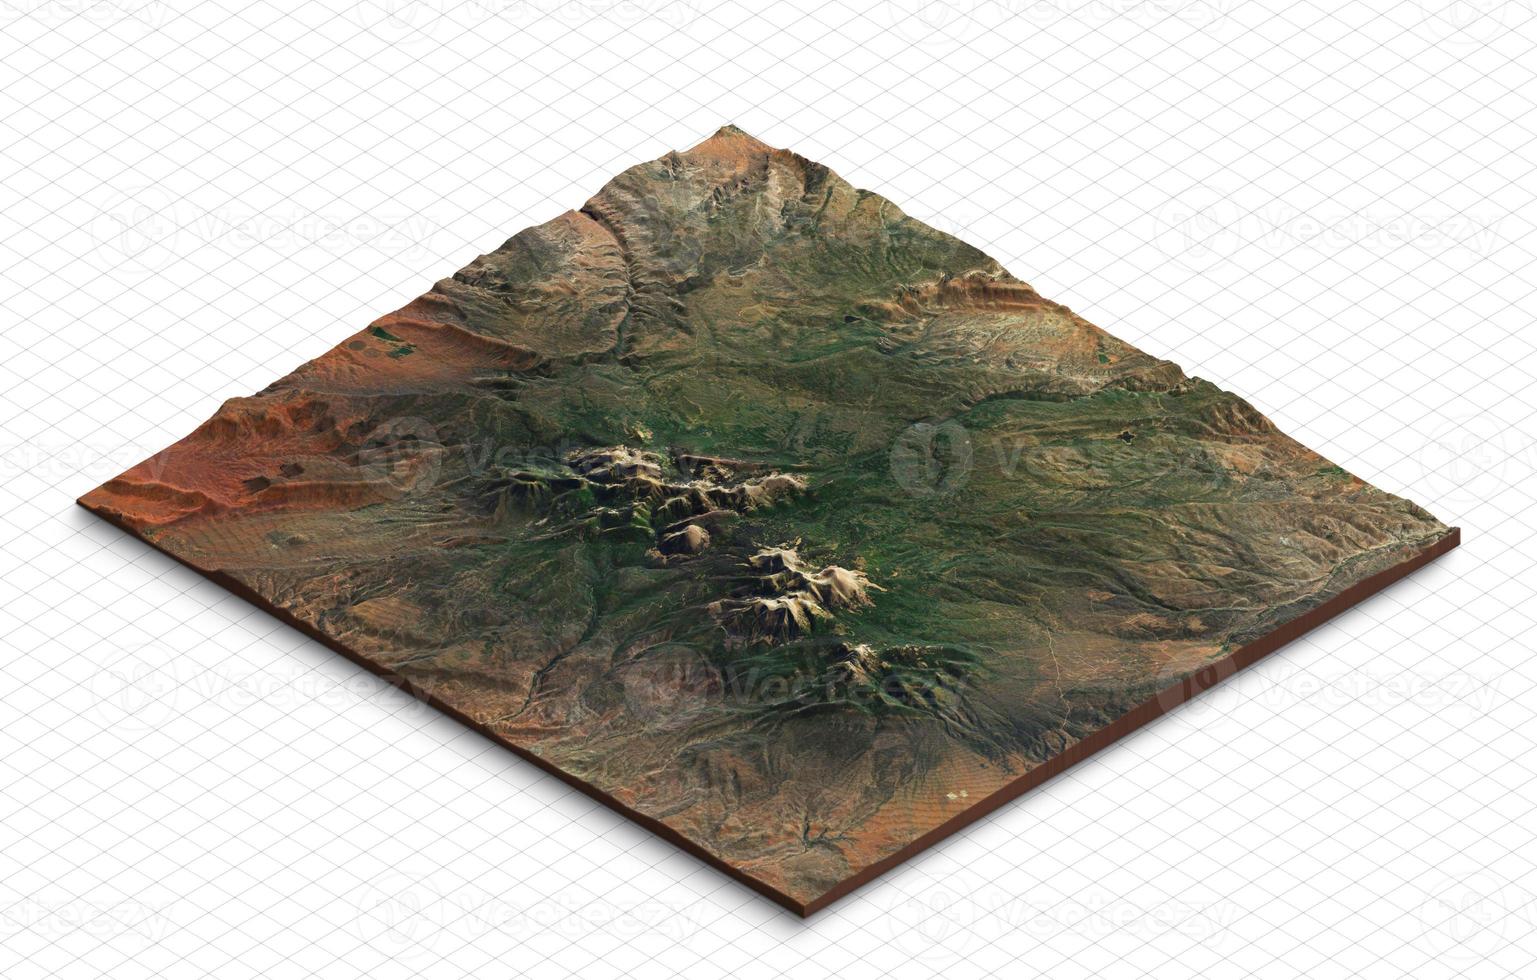 3d model of the Mountains in Utah, USA. Mountain Waas, Mountain Peale, South Mountain. Isometric map virtual terrain 3d for infographic. photo